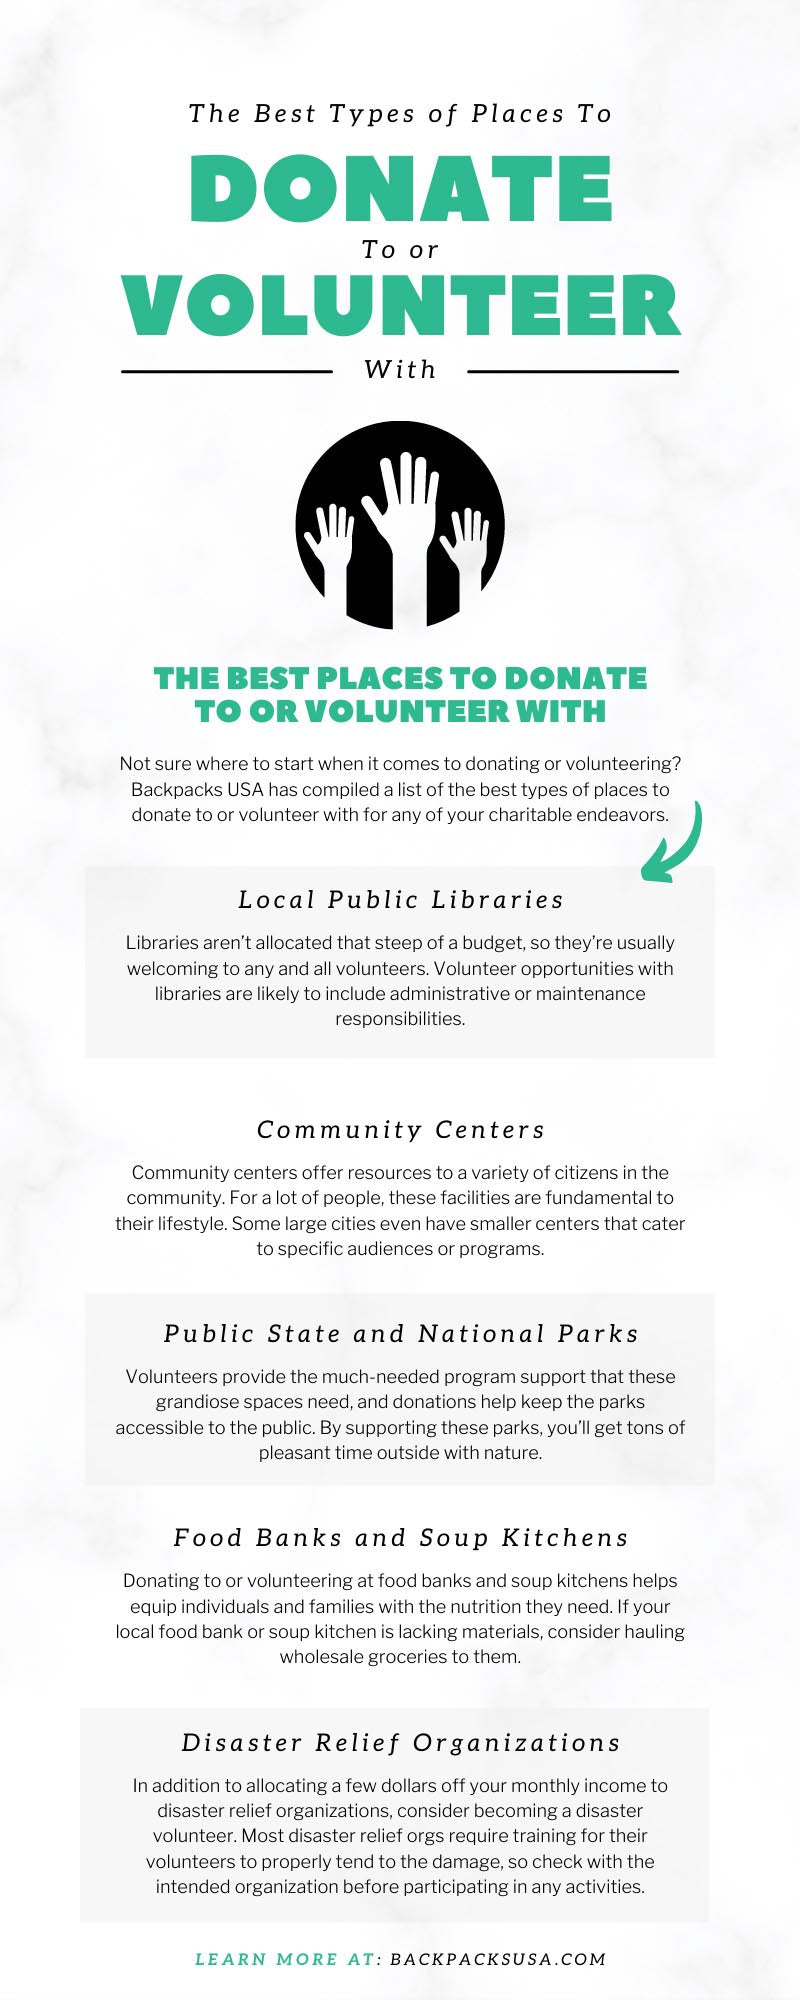 The Best Types of Places To Donate To or Volunteer With